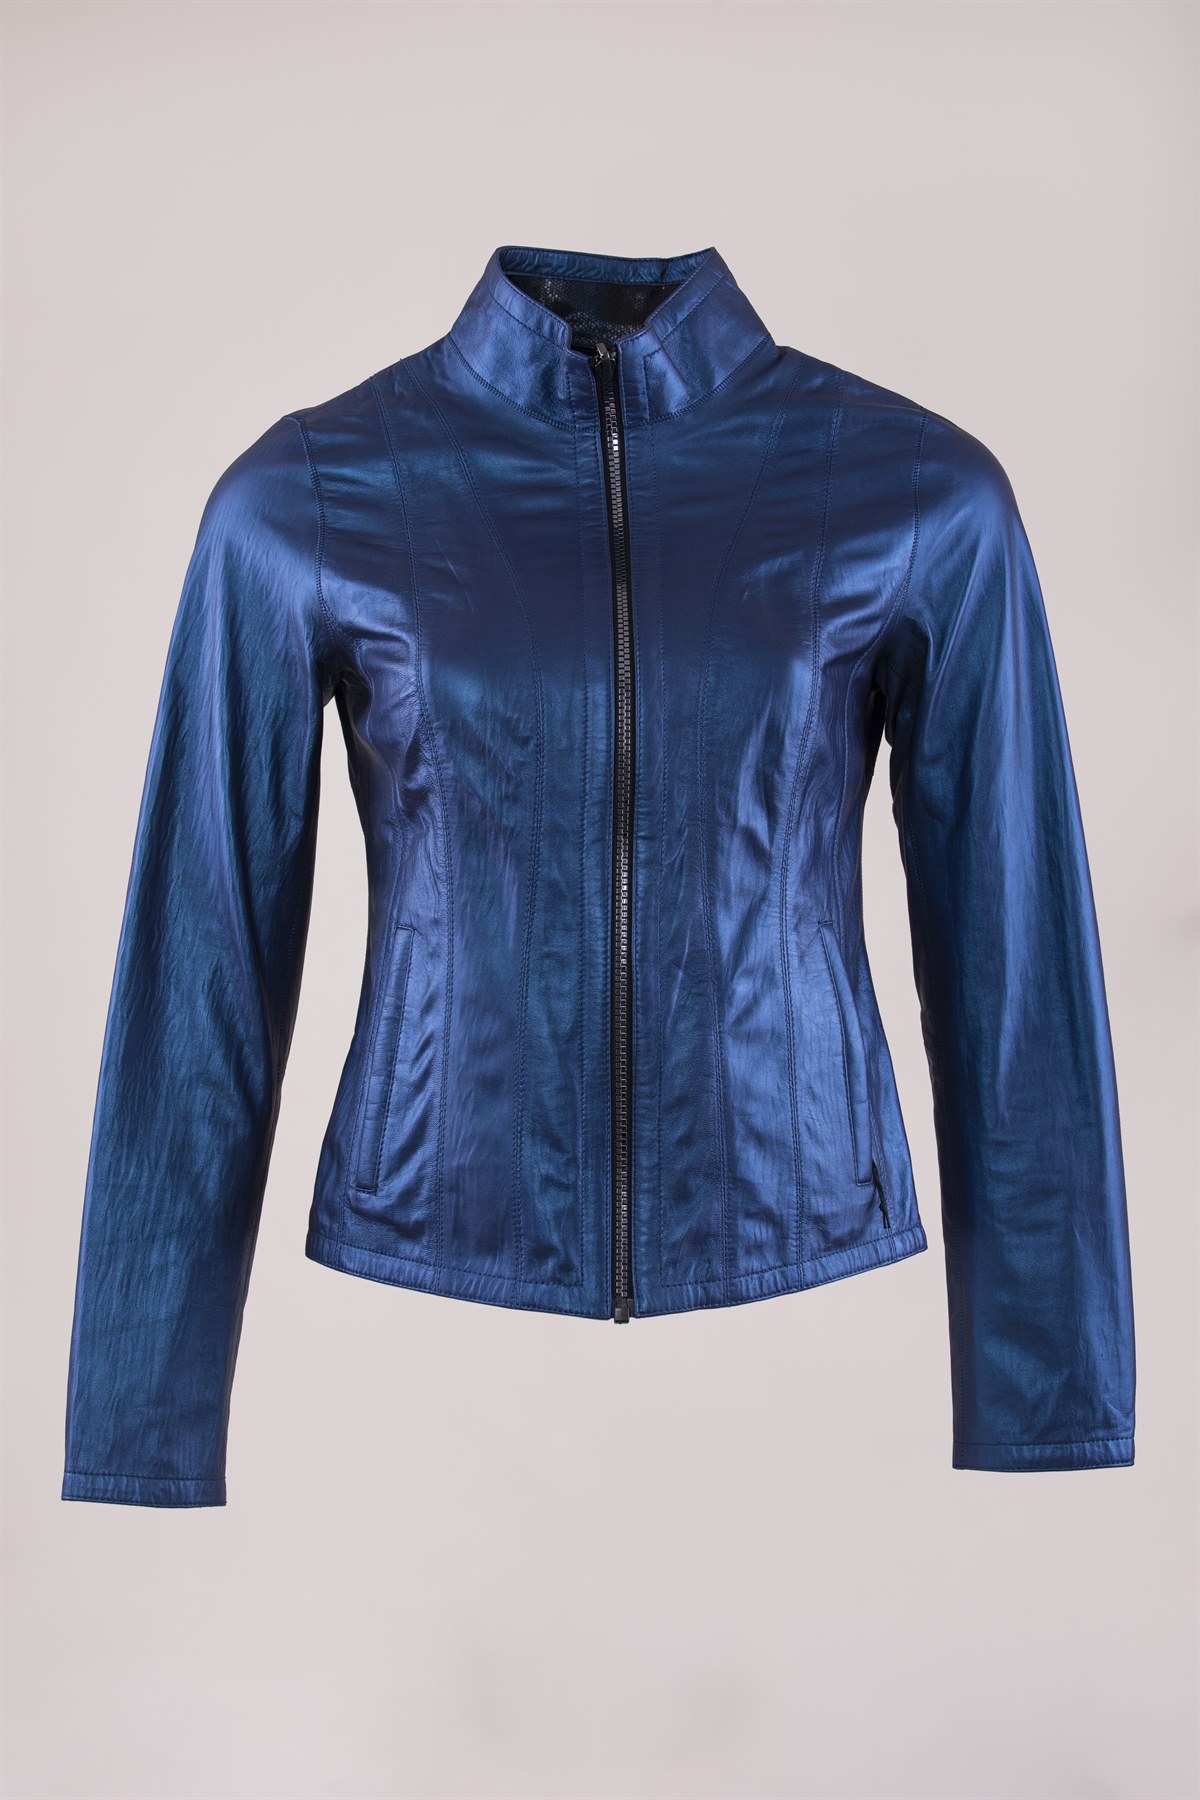 Picture of Female female navy blue leather jacket